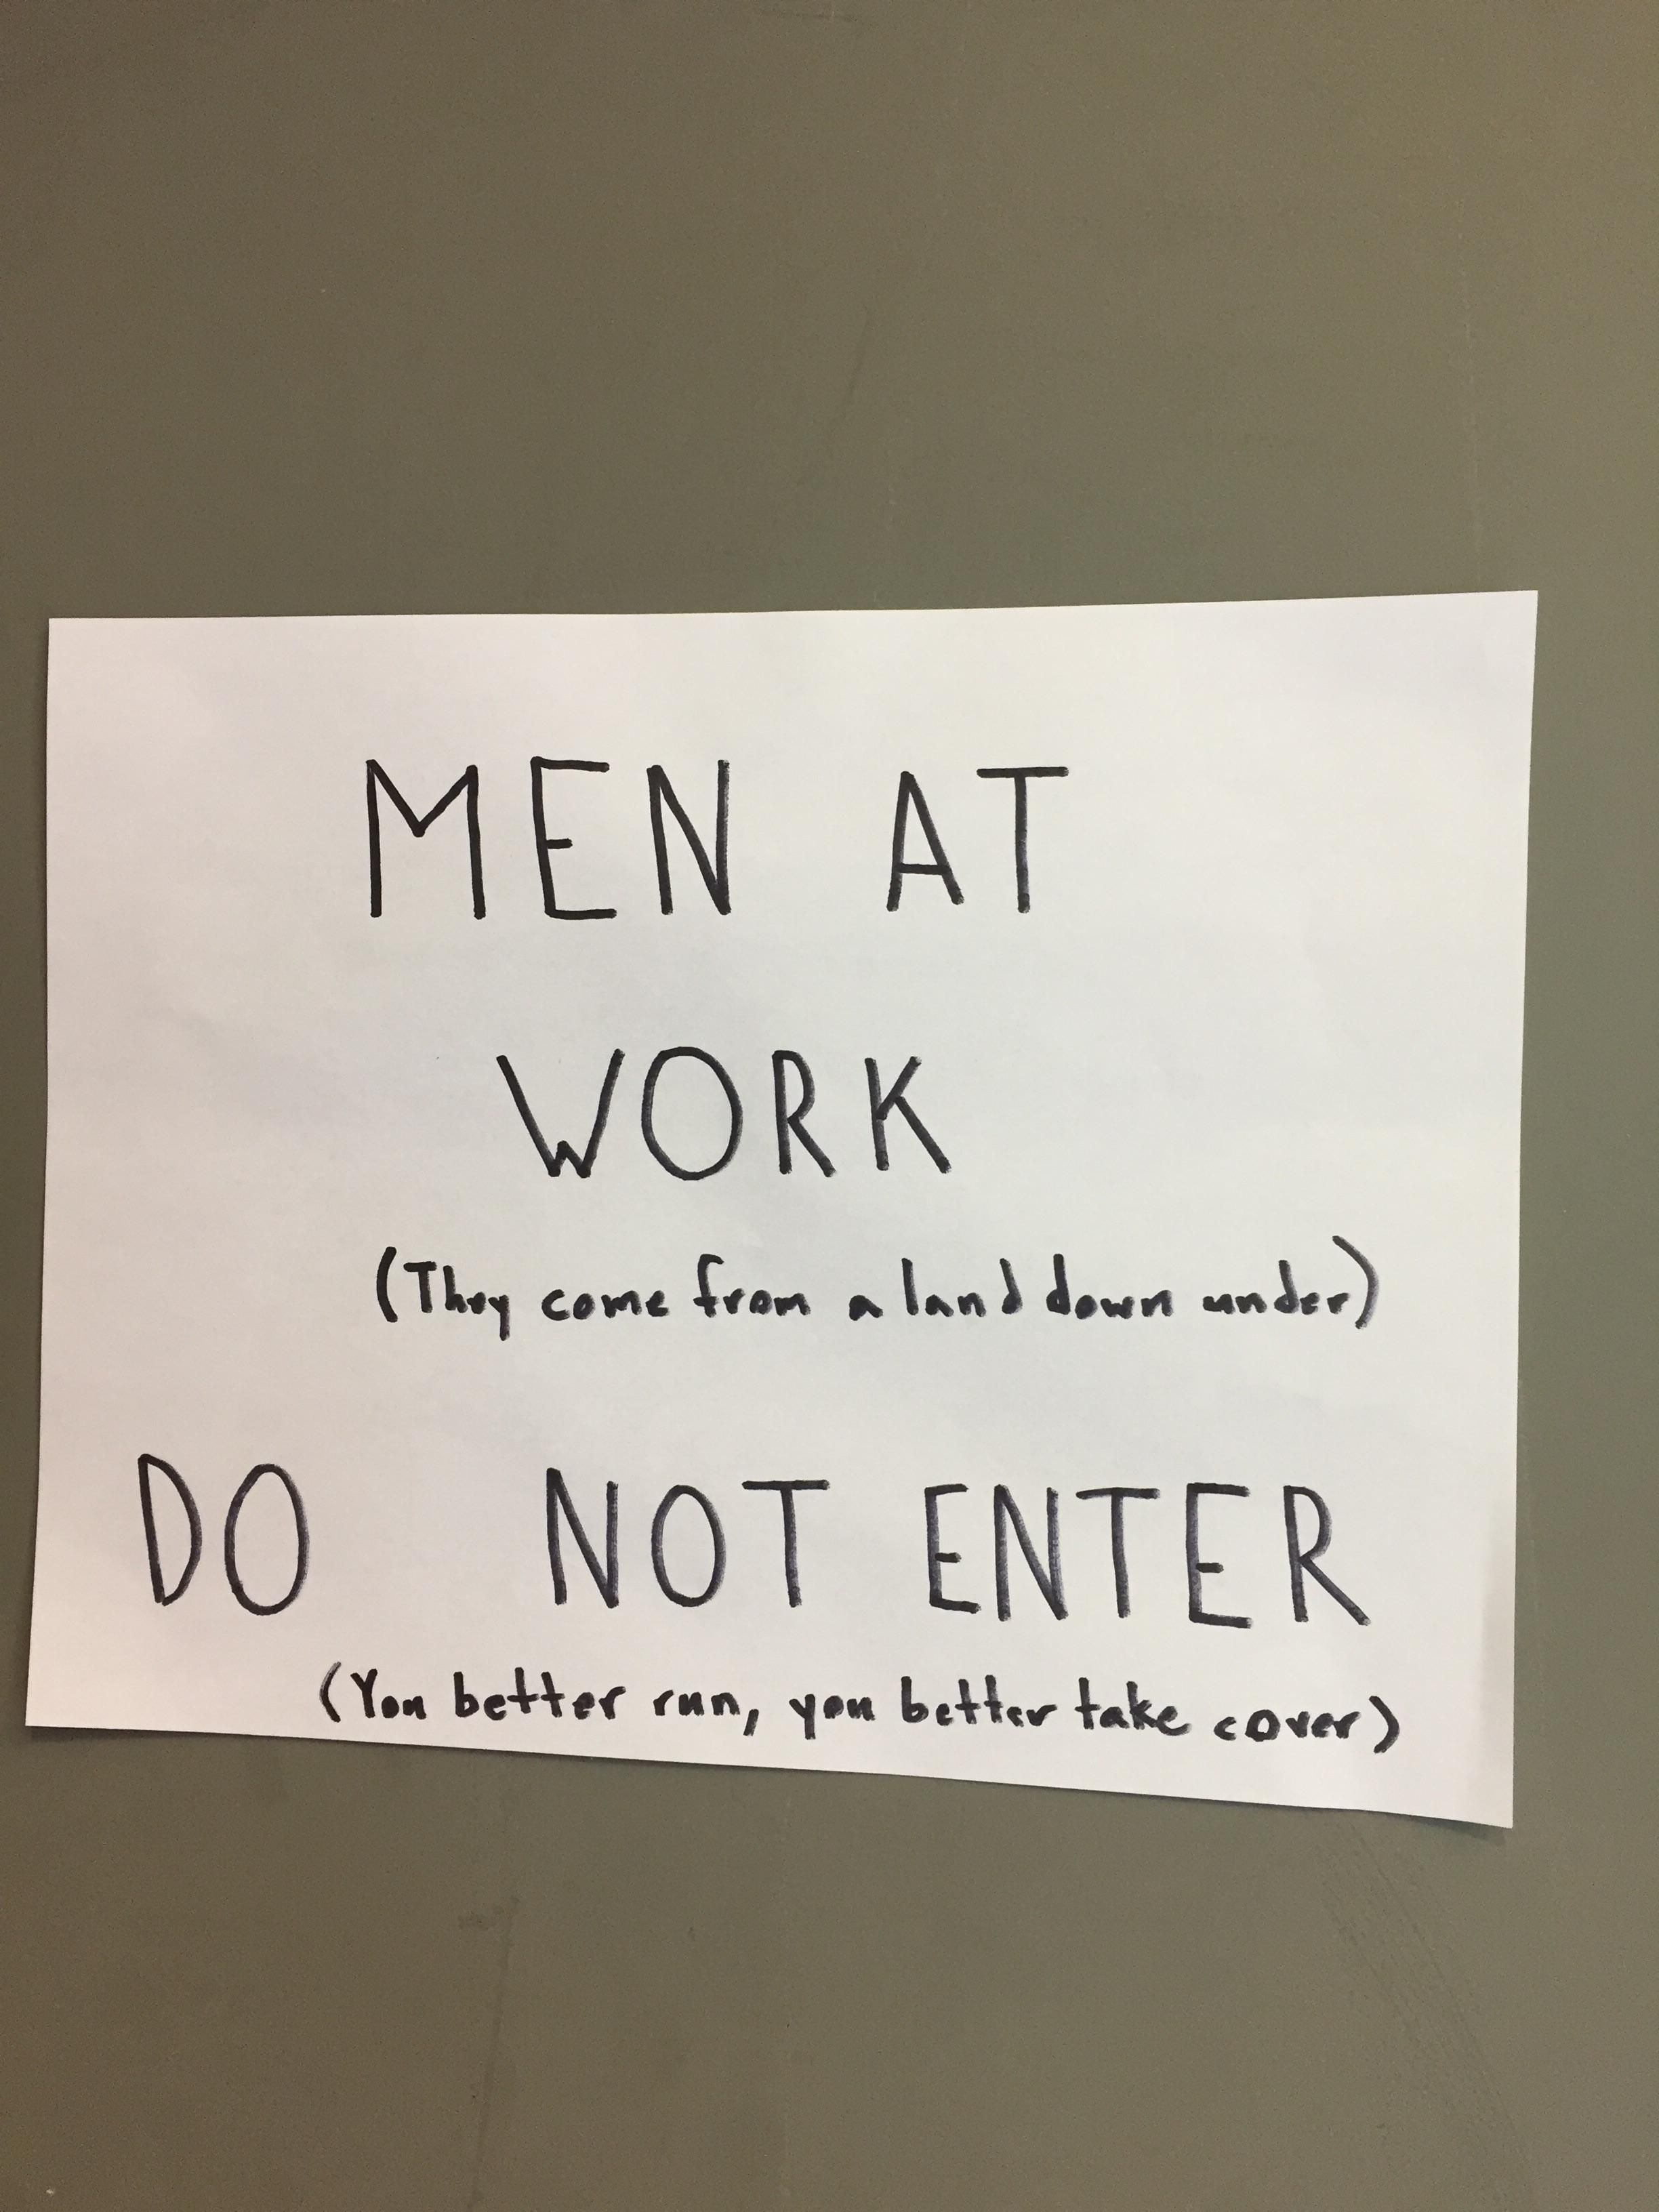 Customers kept trying to go into the room that was obviously under construction so the security guard put up a sign.